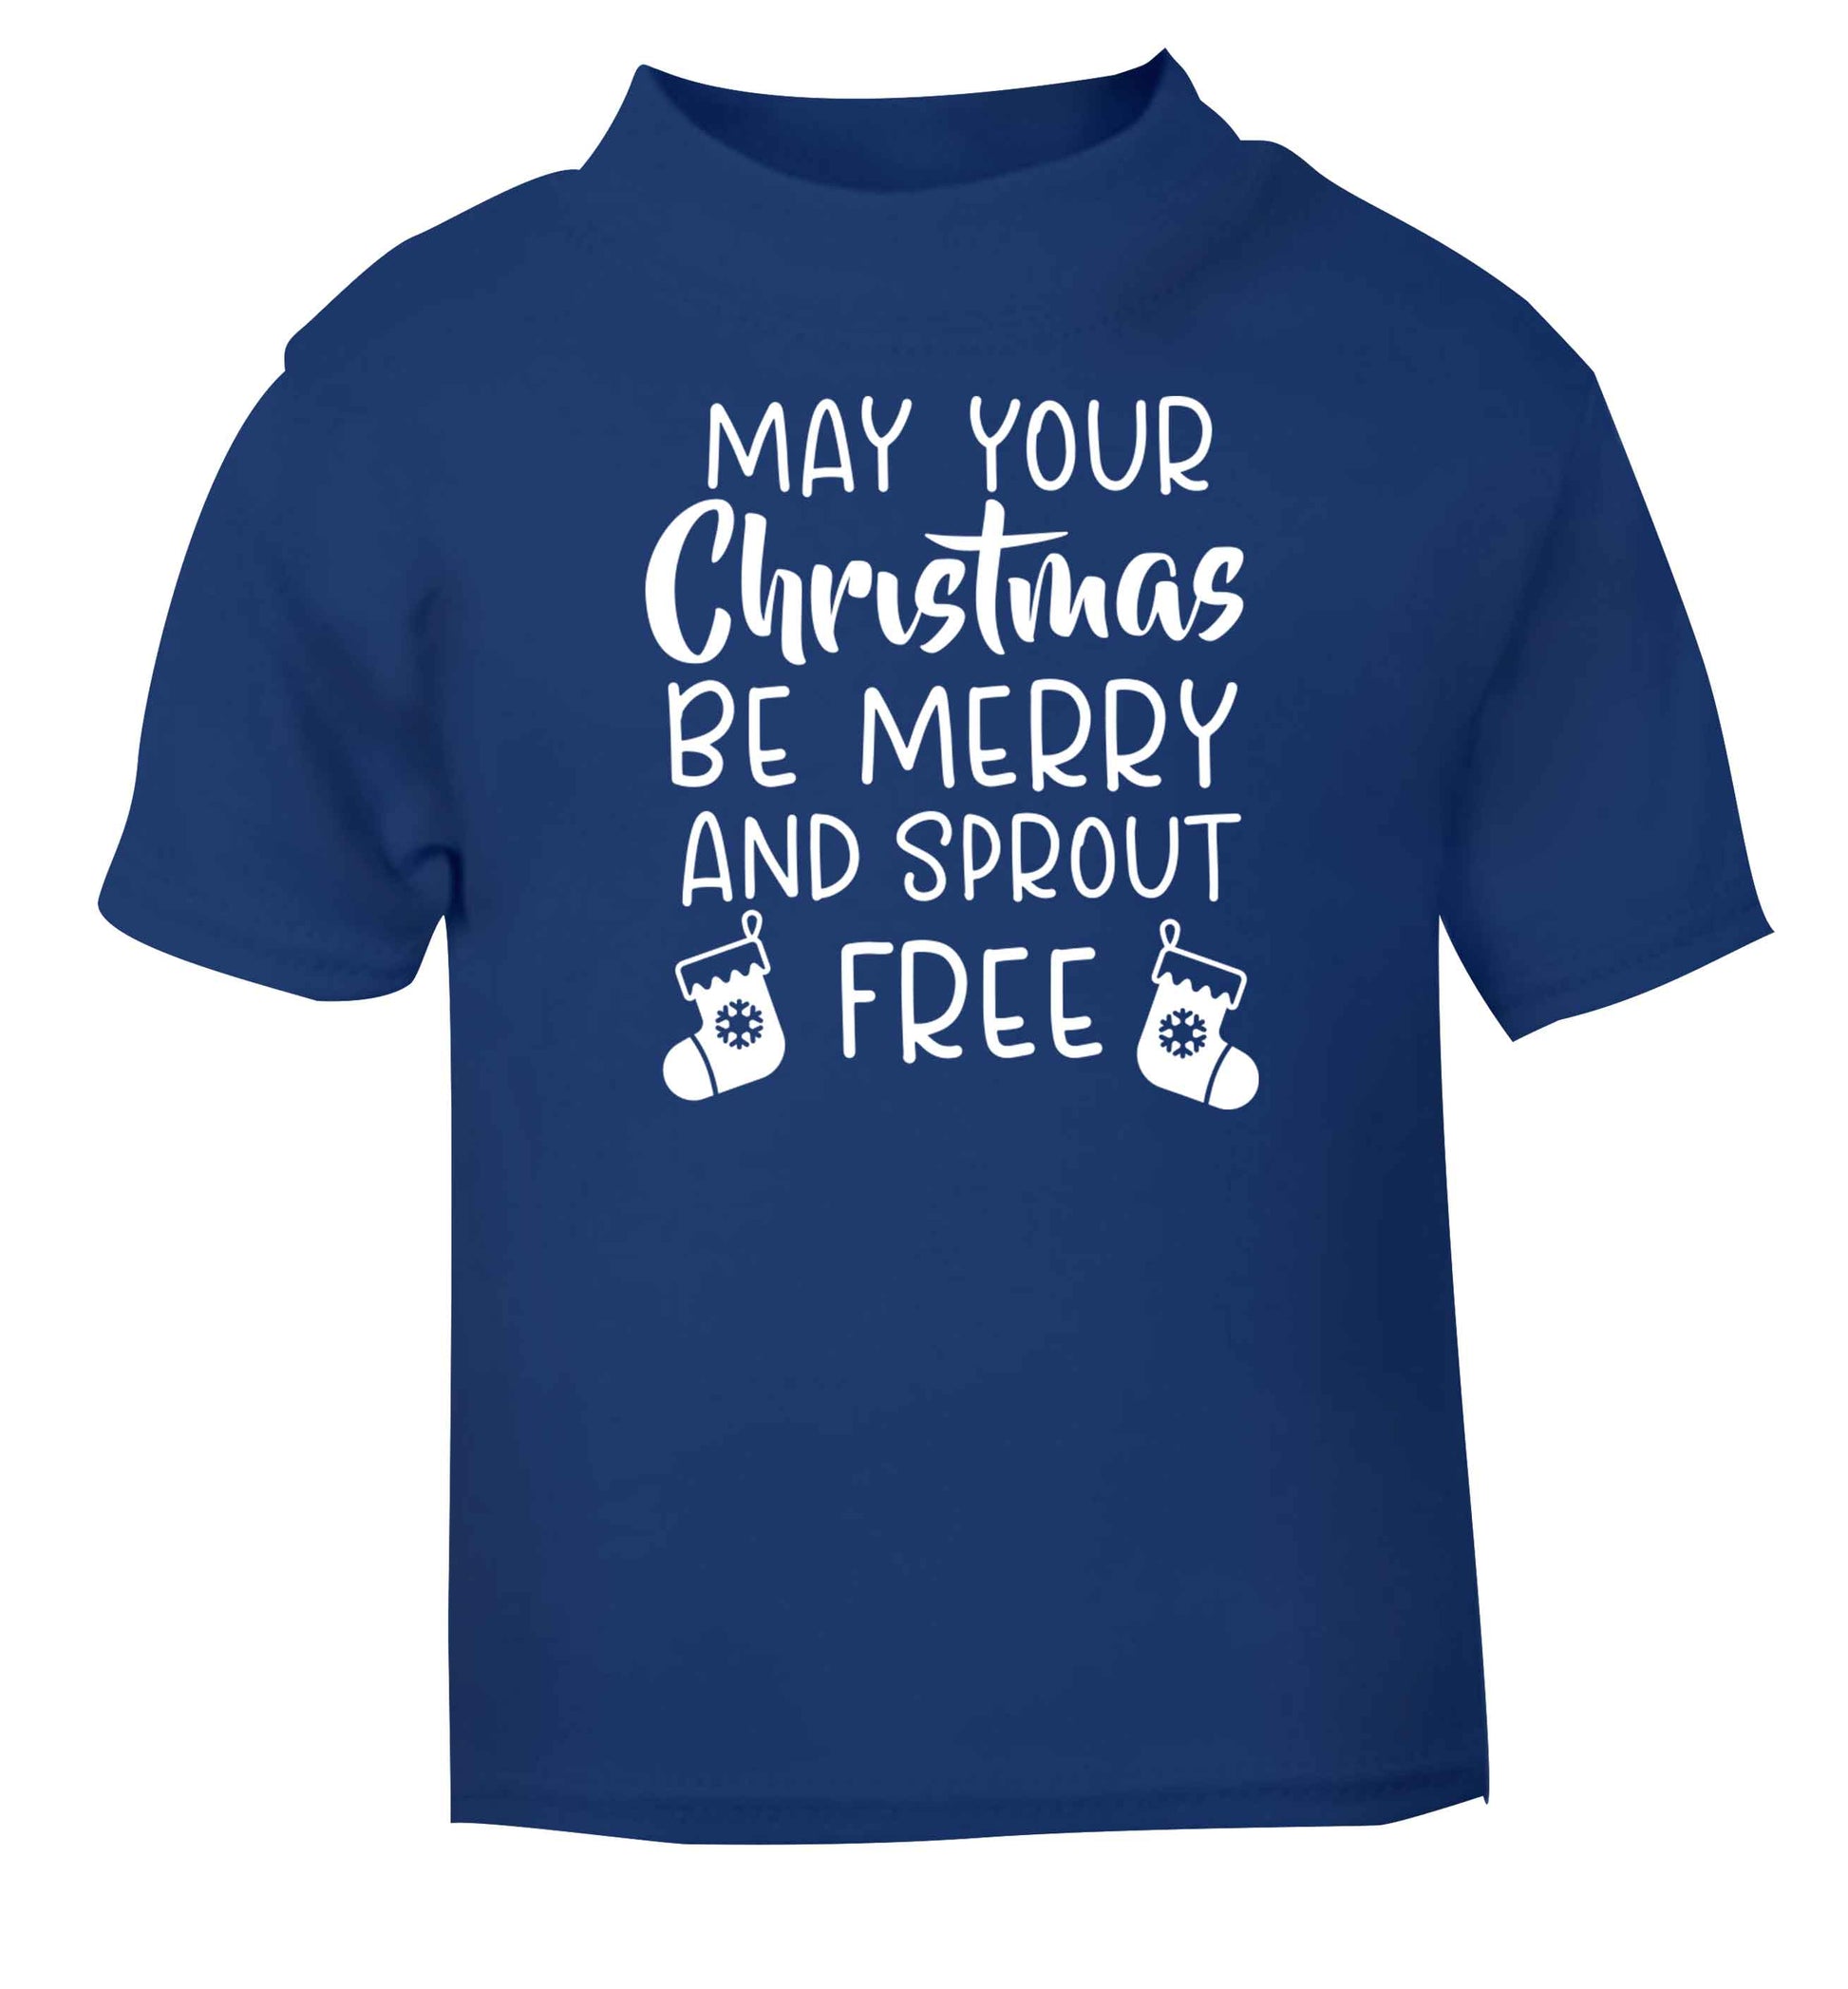 May your Christmas be merry and sprout free blue baby toddler Tshirt 2 Years